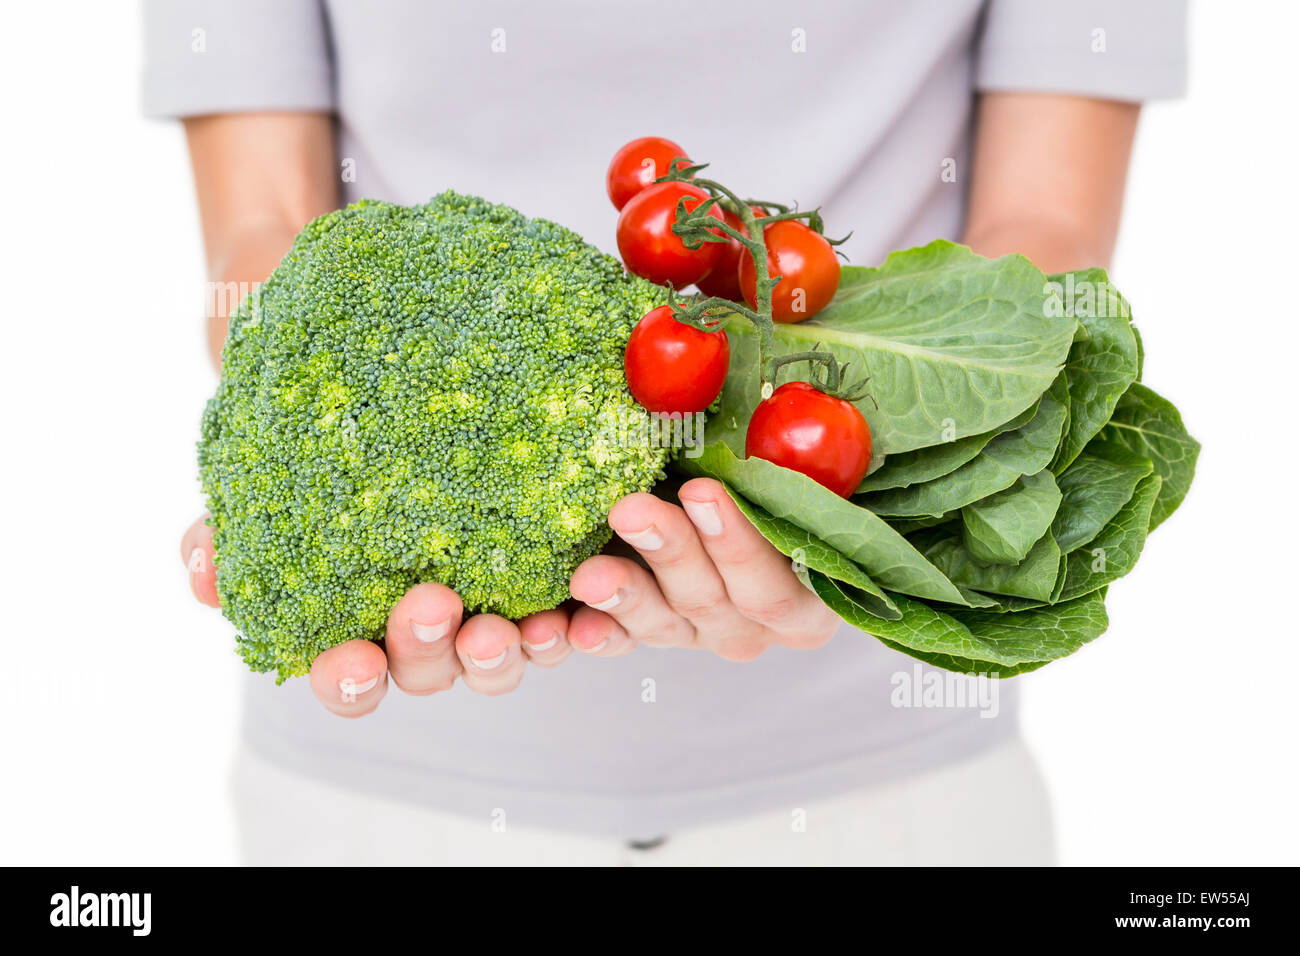 Woman holding vegetables Stock Photo